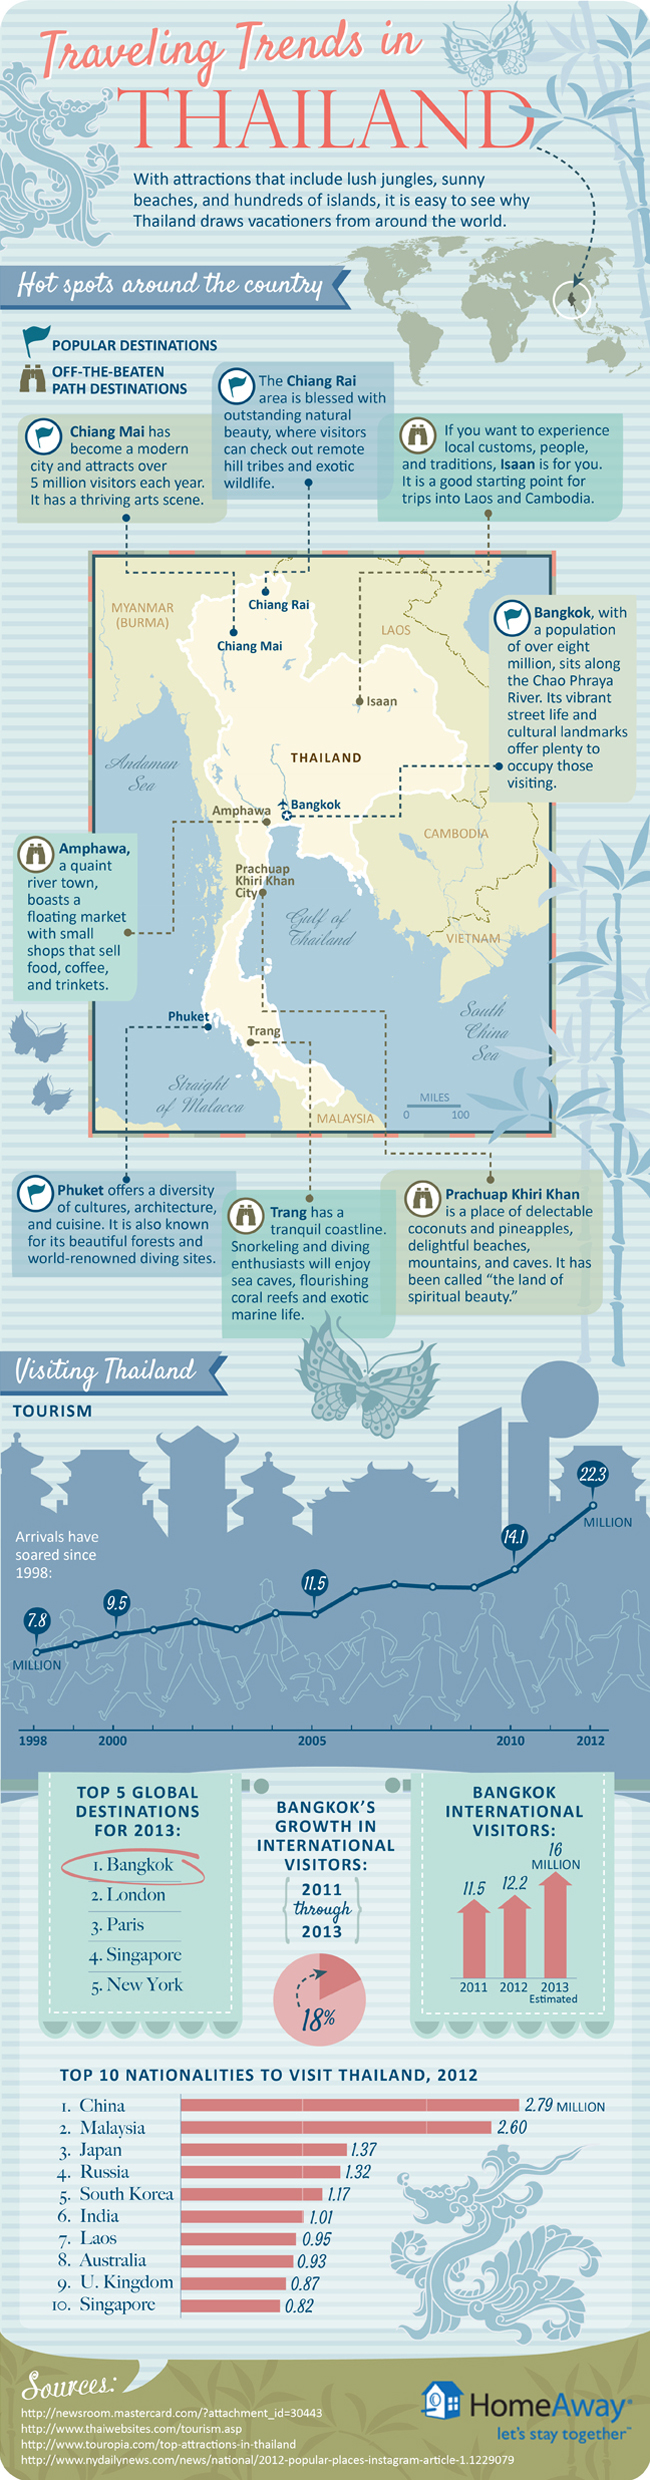 Travel Trends in Thailand